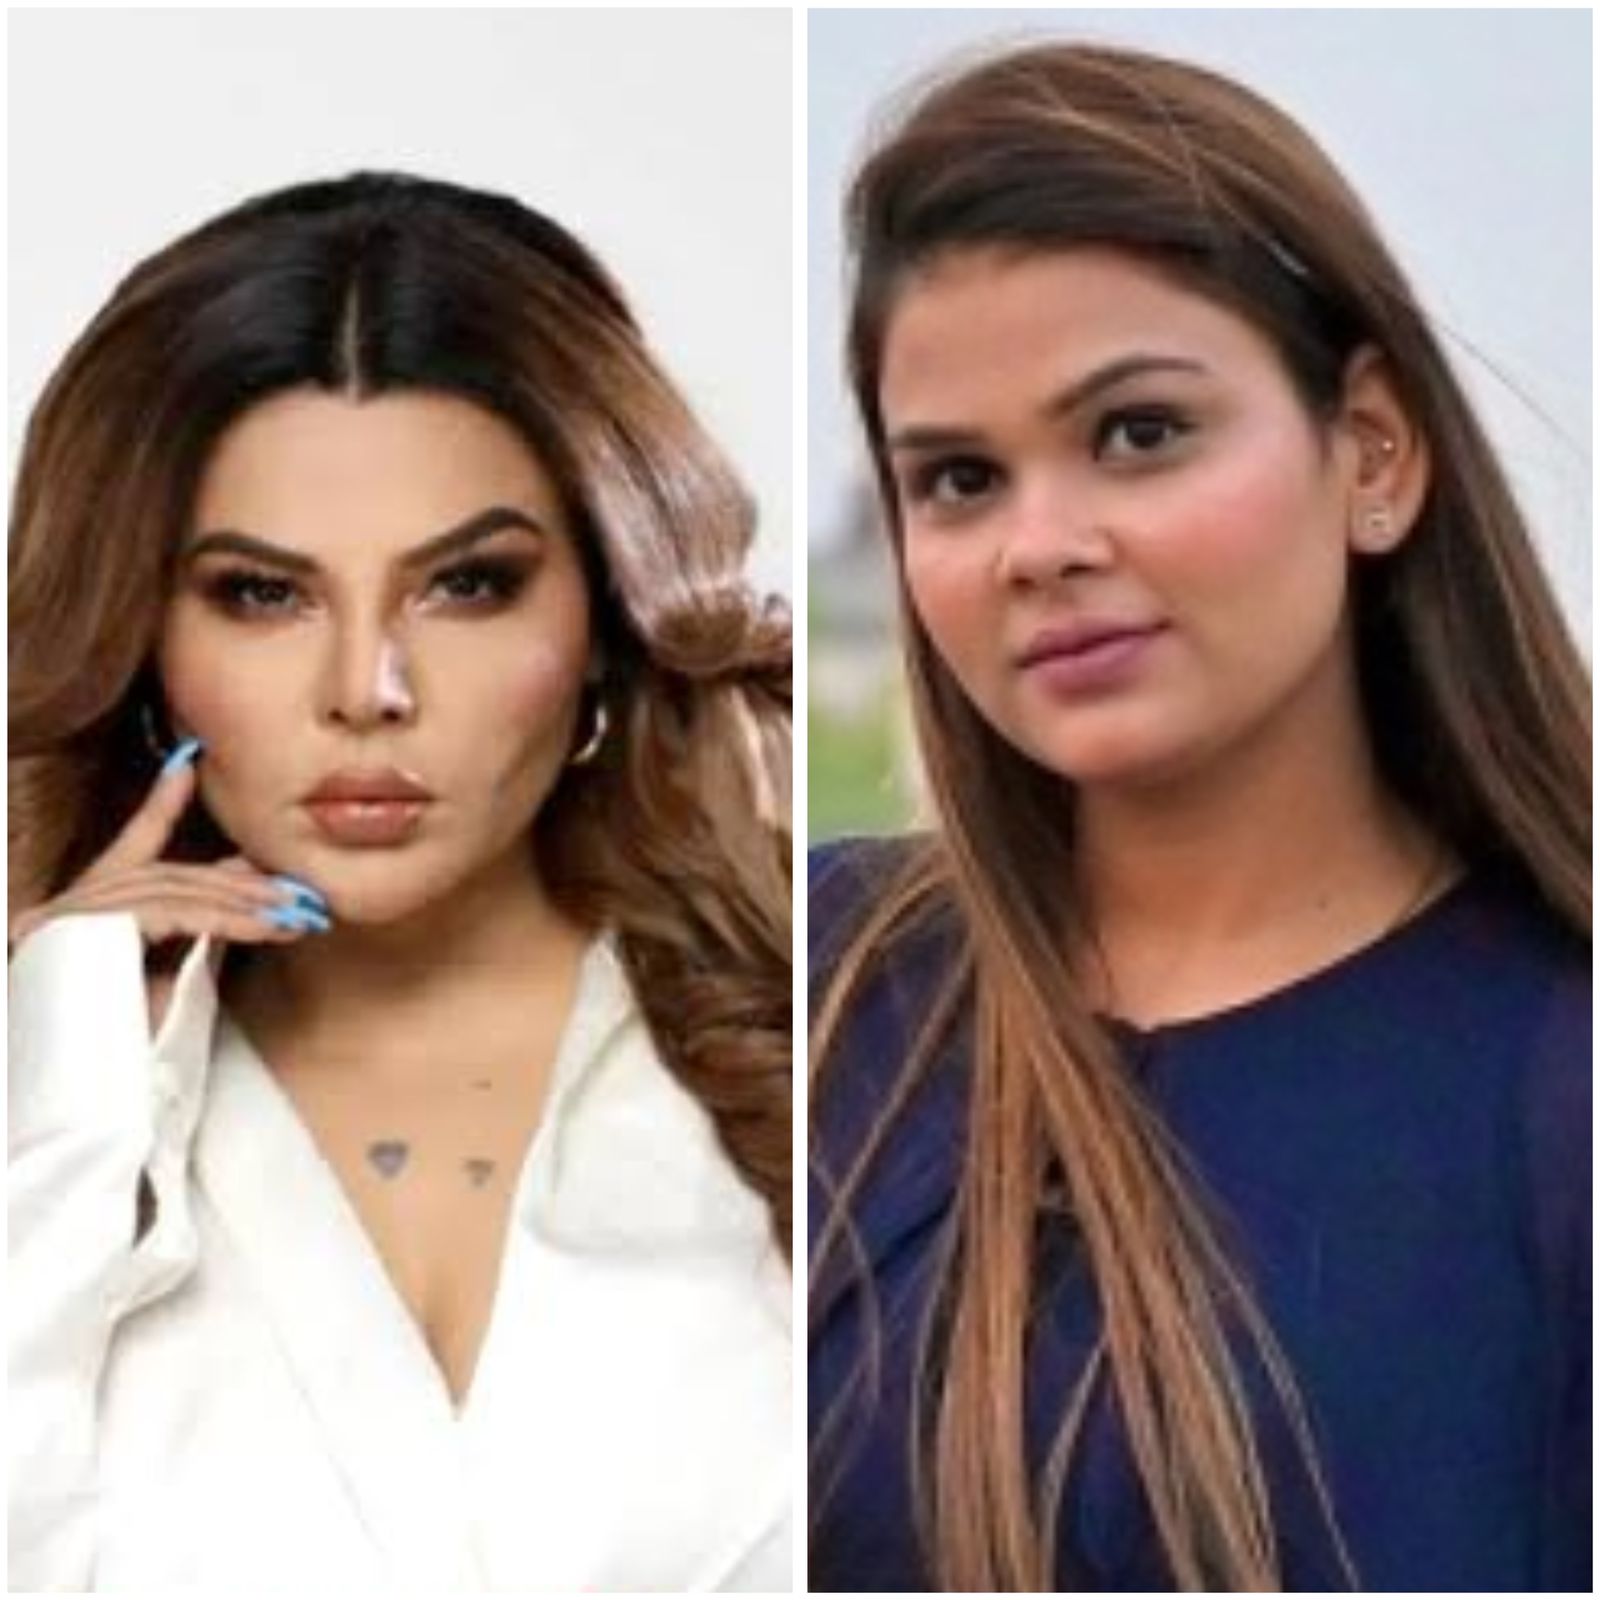 Bigg Boss OTT 3 fame Payal Malik who is Armaan Malik’s wife bashes Rakhi Sawant for making fun of her family and sabotaging their image, gives a stern warning to stay away from her and her family, says “ I dont need justice from you , you can give justice to the 3-4 men you got married to”